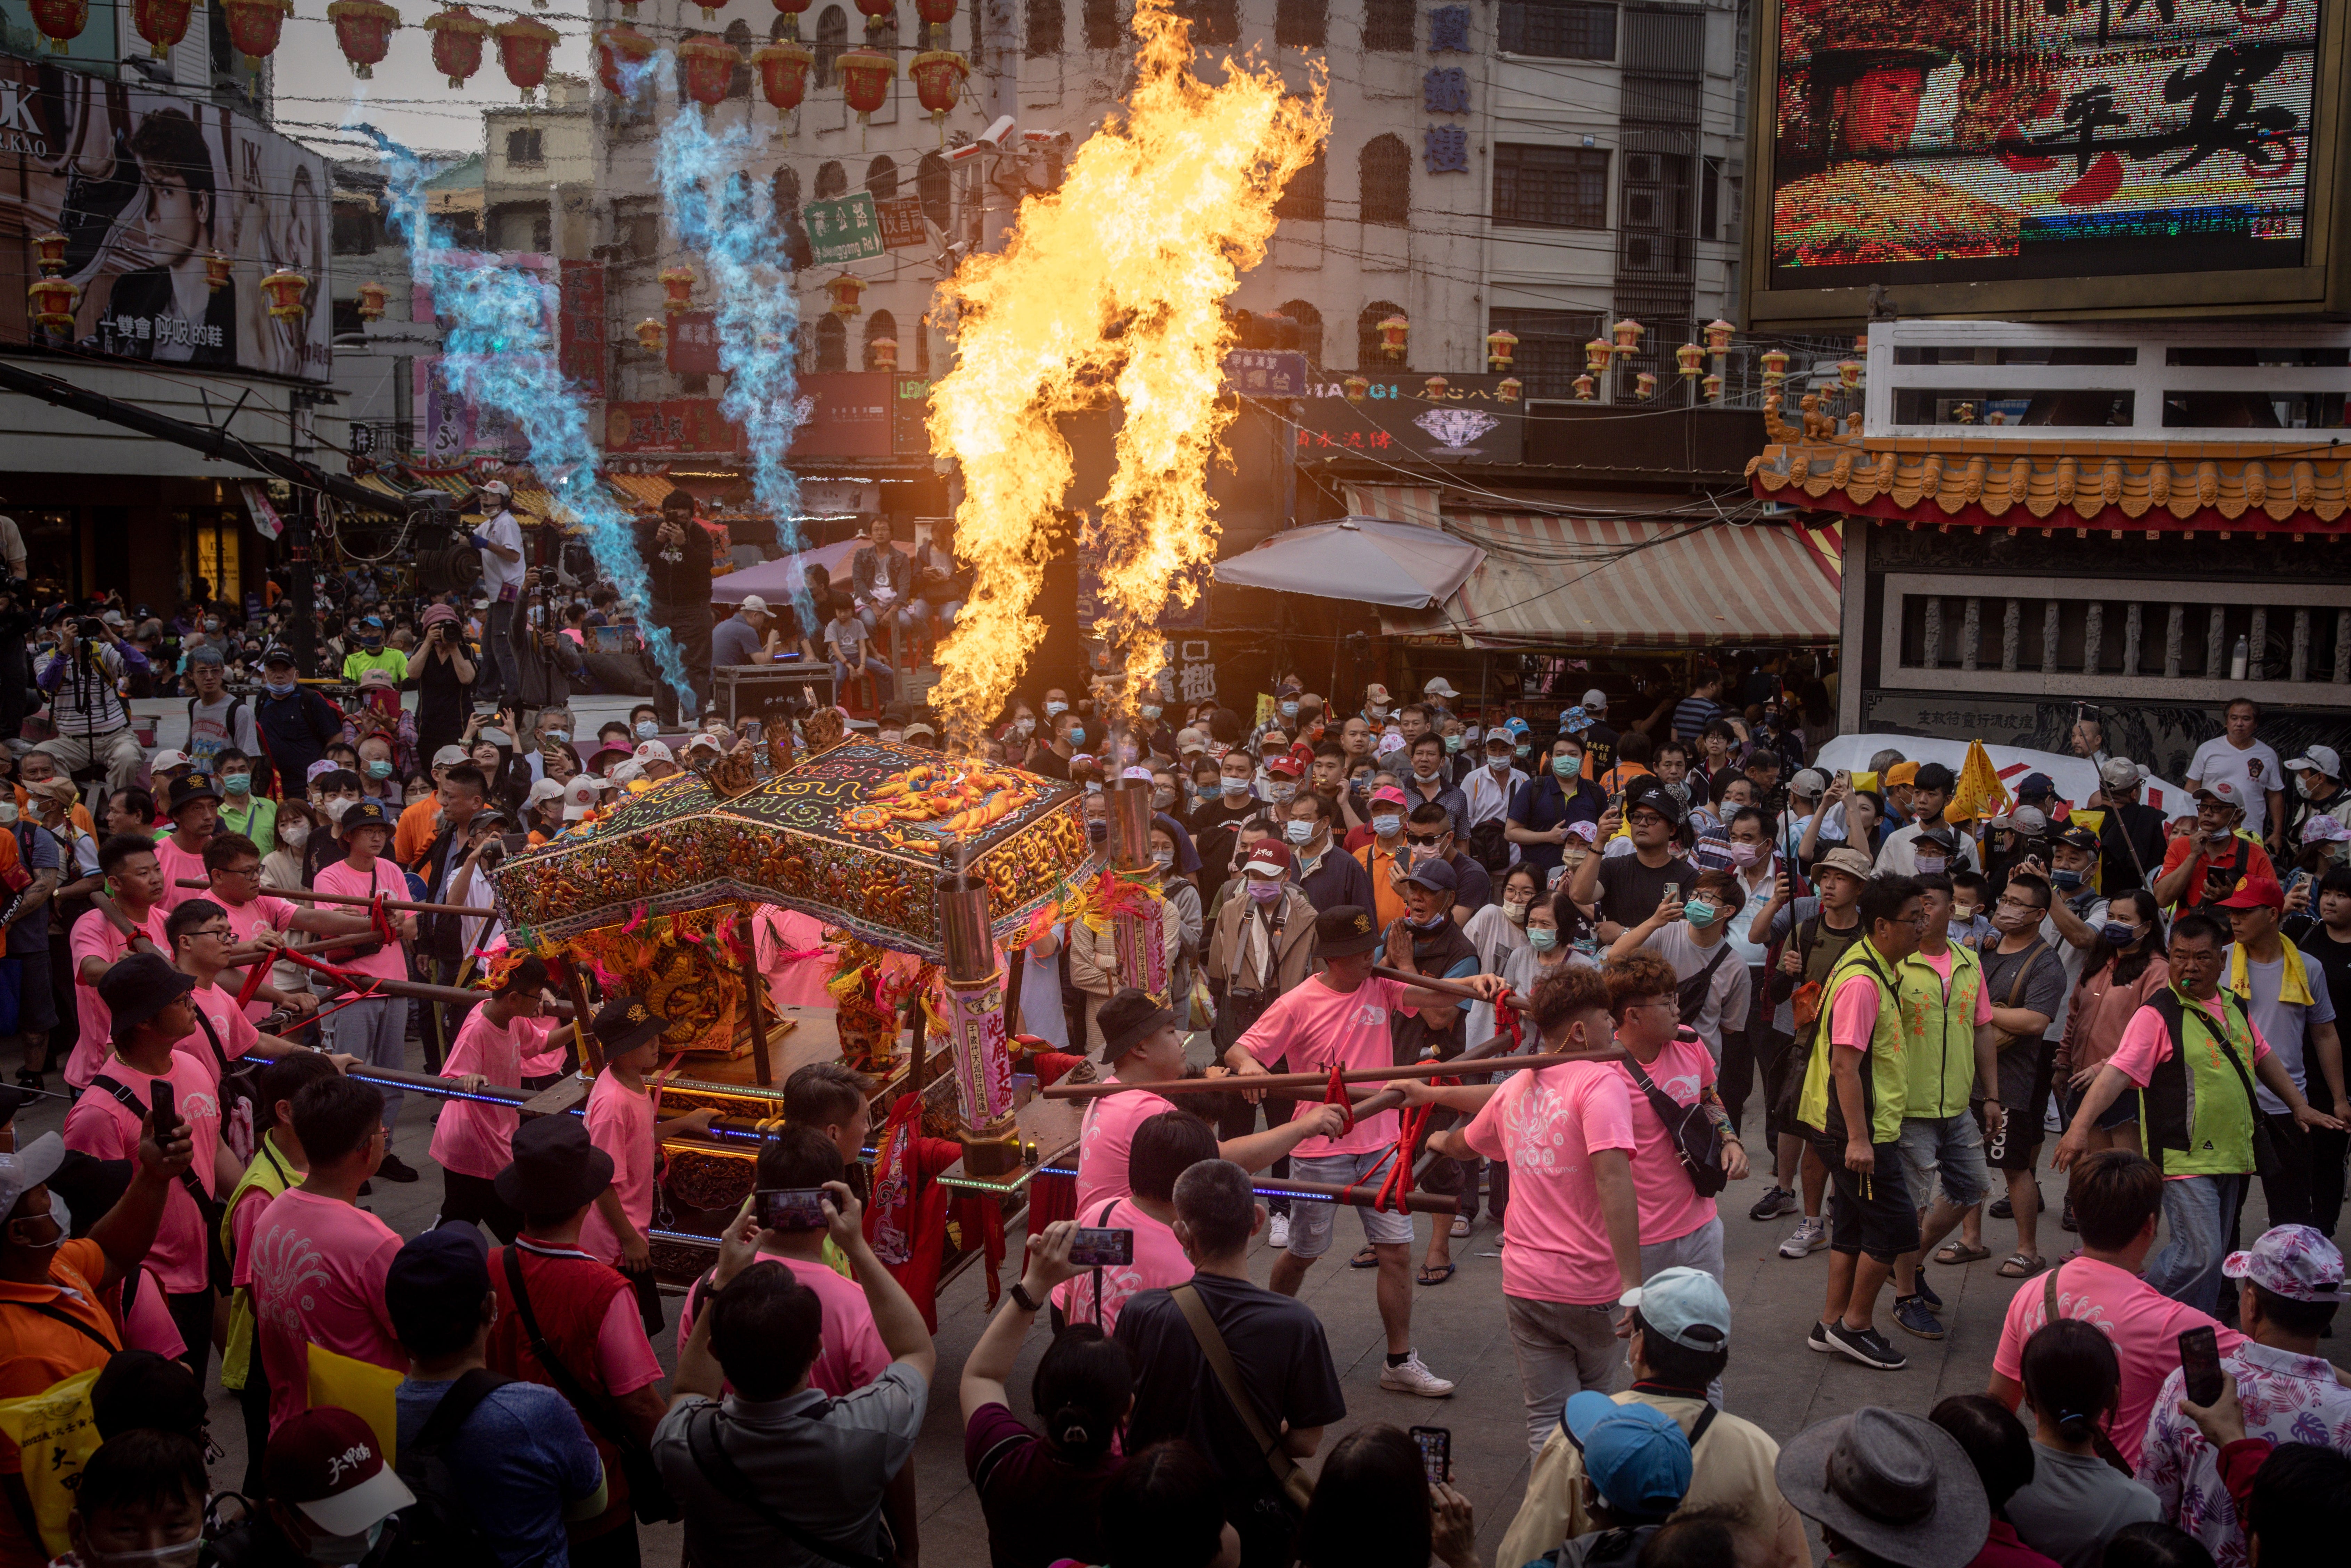 Elaborate Mazu religious processions often attract thousands of worshippers in Taiwan